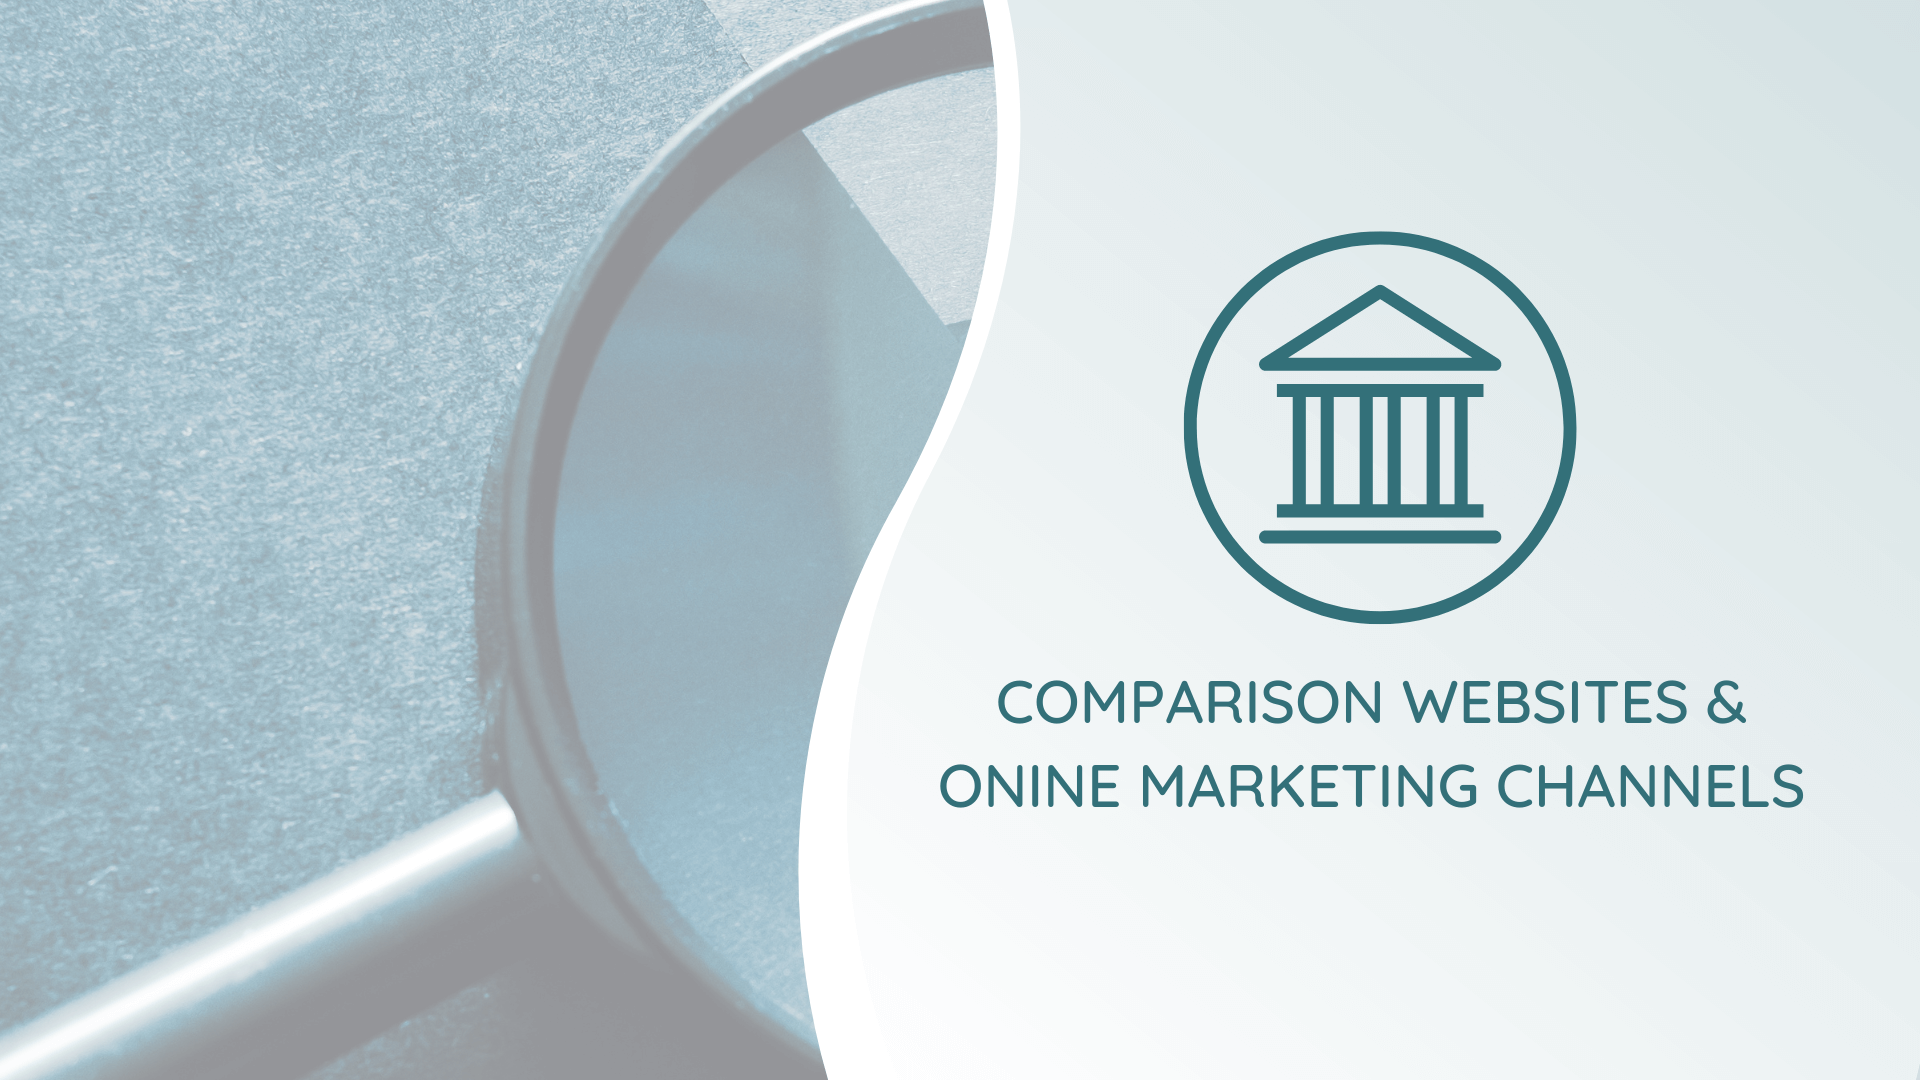 Customer acquisition – a loss-making business? To what extent are comparison websites and online marketing channels worthwhile for banks?